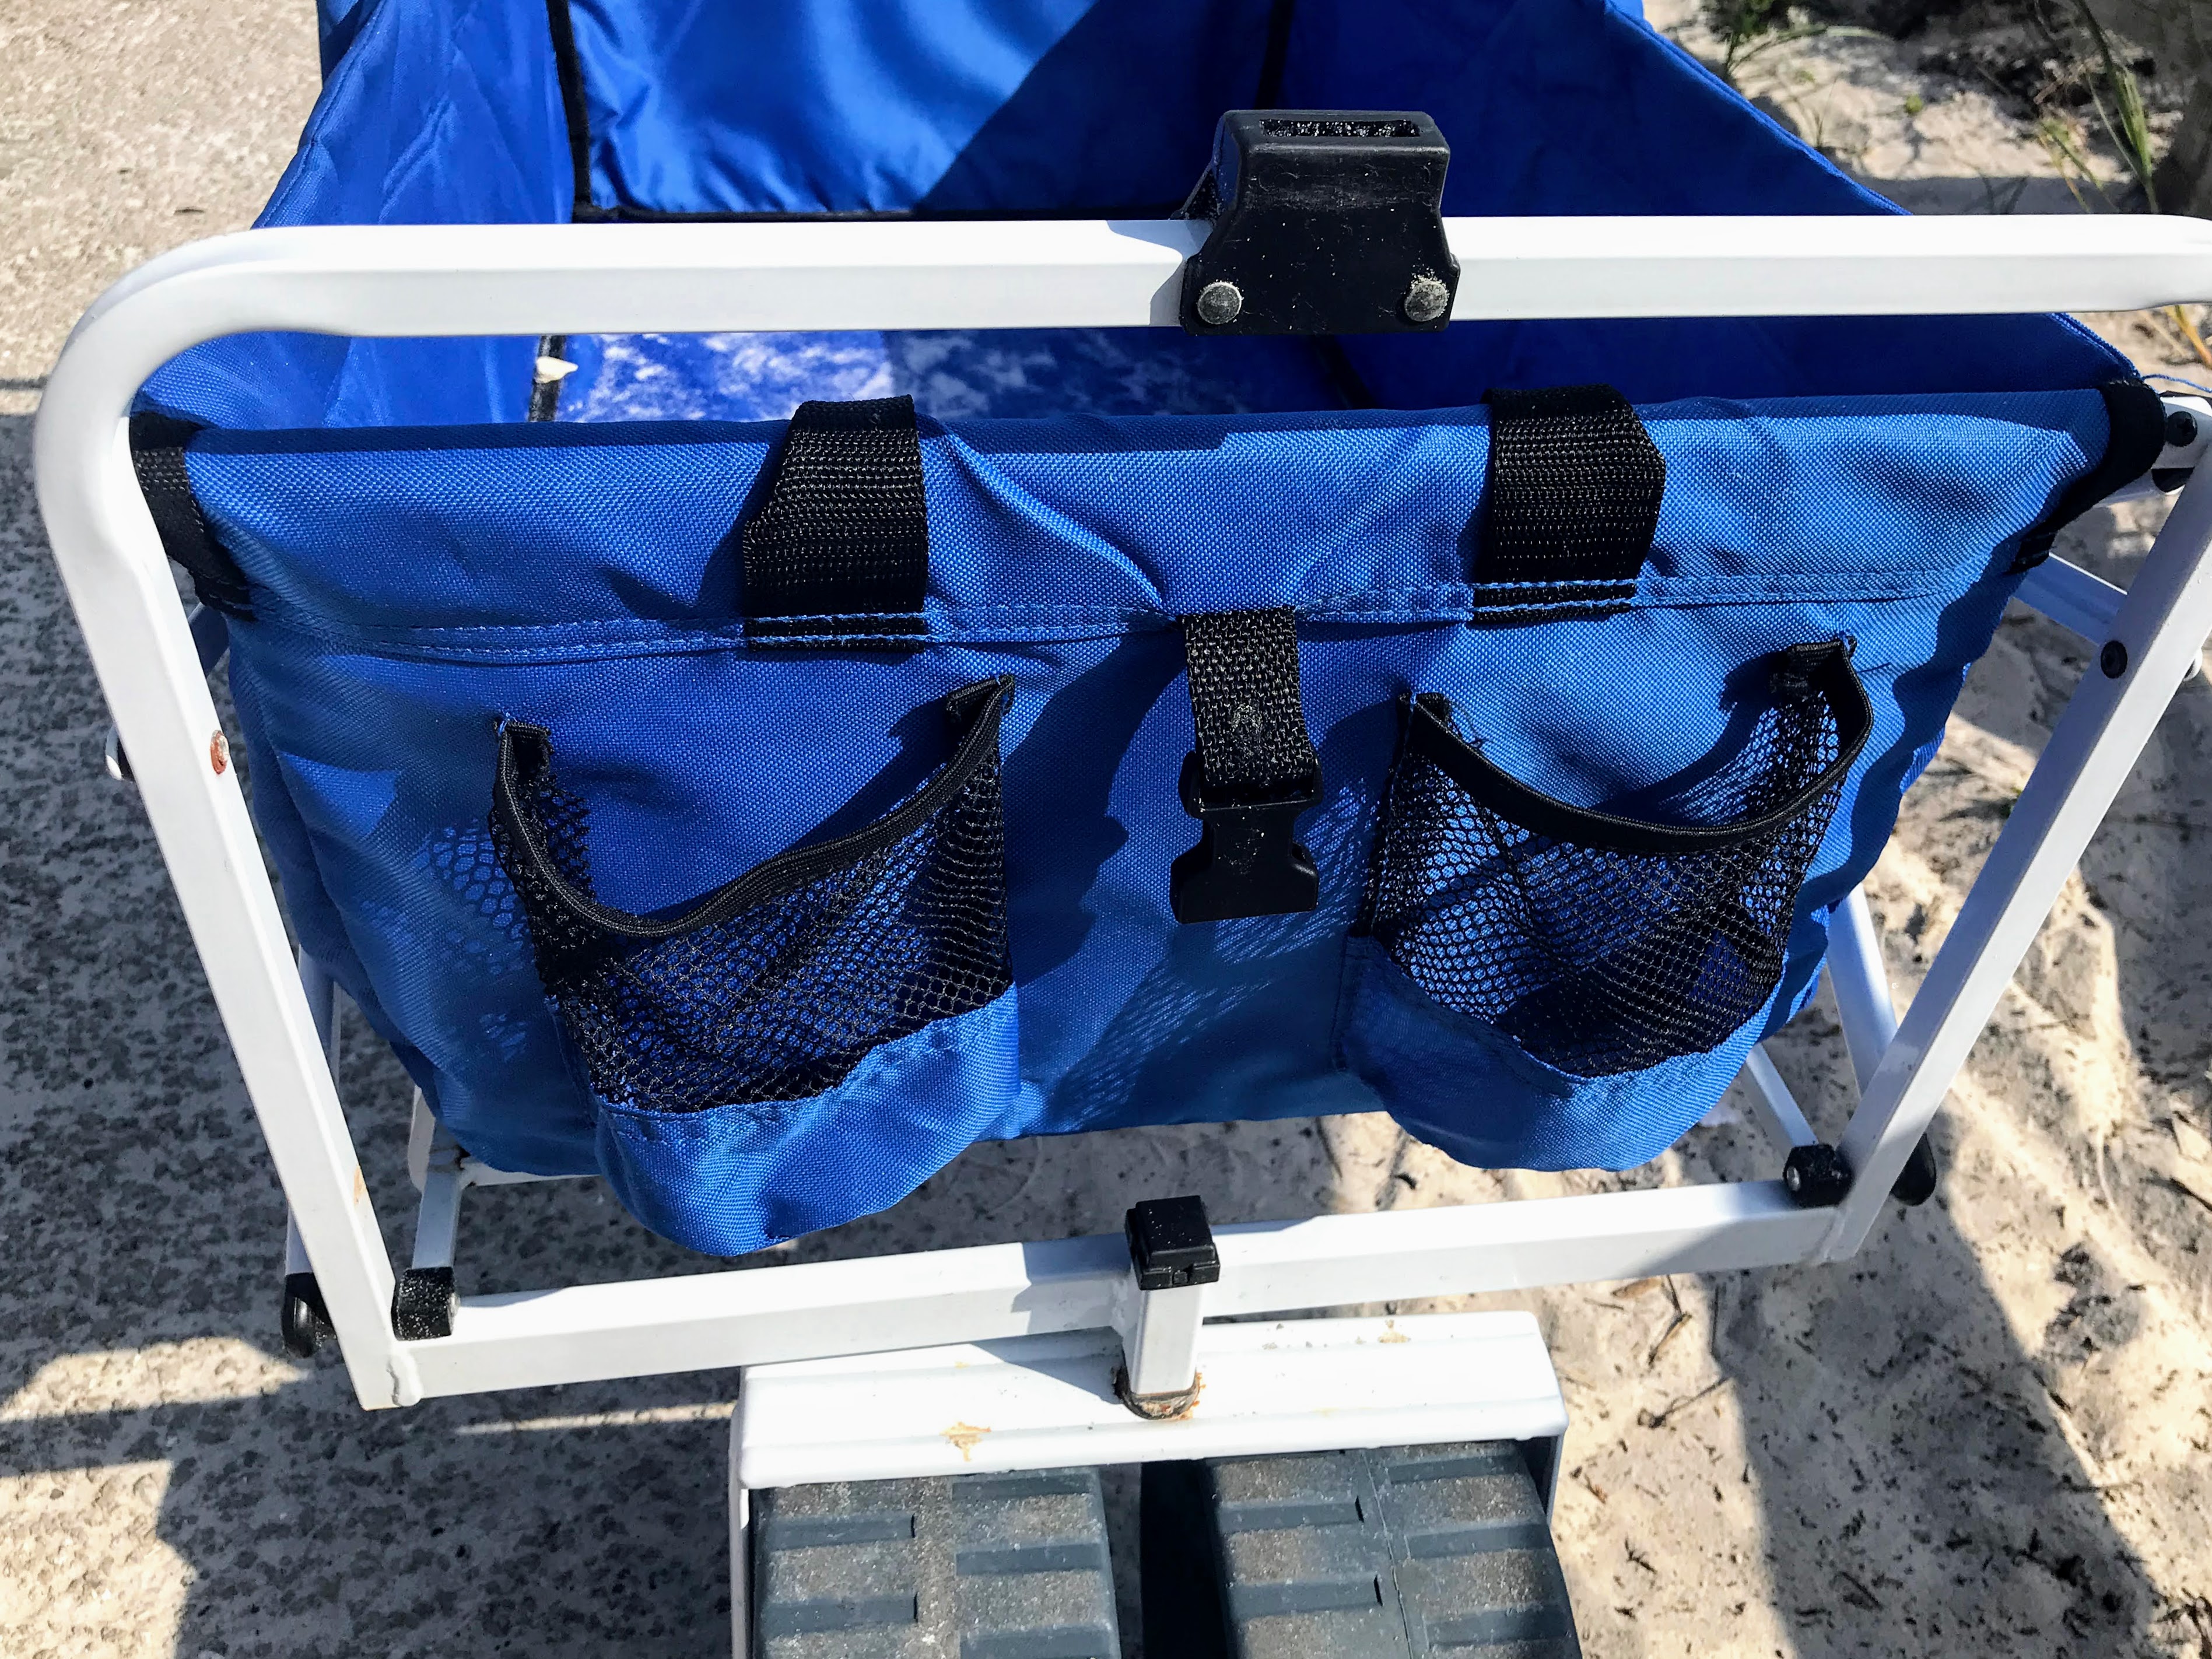 Best Beach Wagon for Getting Your Gear to the beach in one trip